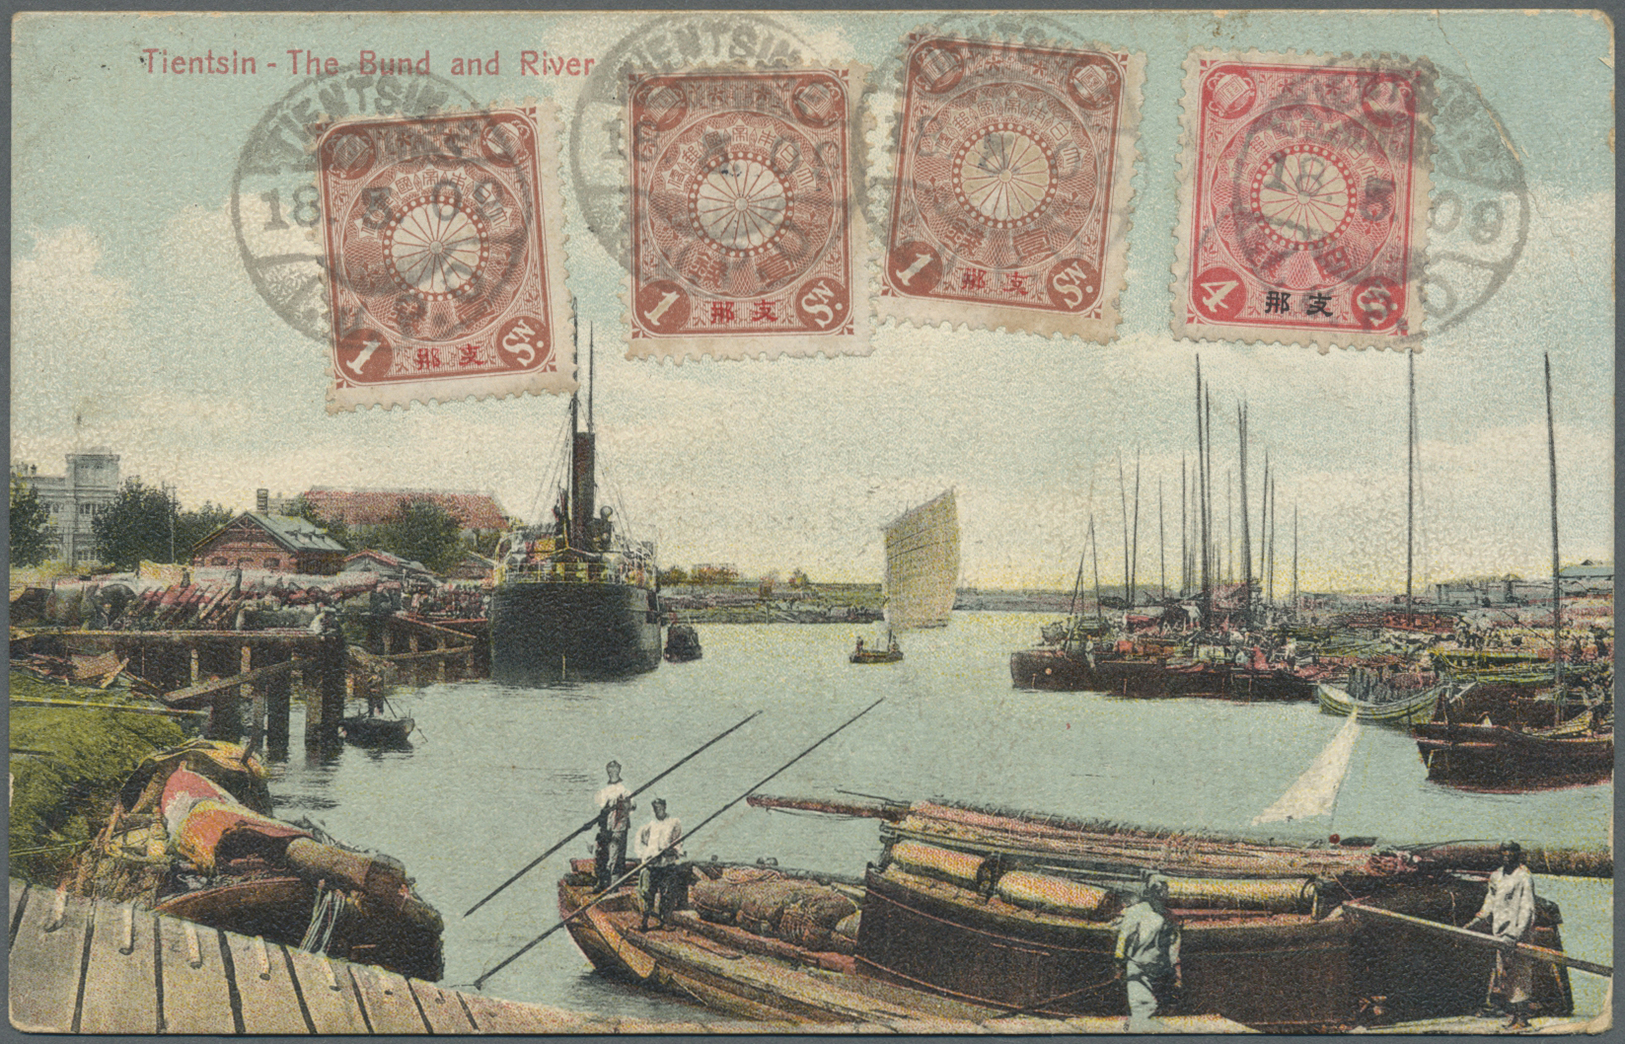 Br Japanische Post In China: 1909. Picture Post Card Of 'The Bund And River, Tientsin' Addressed To German, Tsing-Tau Be - 1943-45 Shanghai & Nanjing